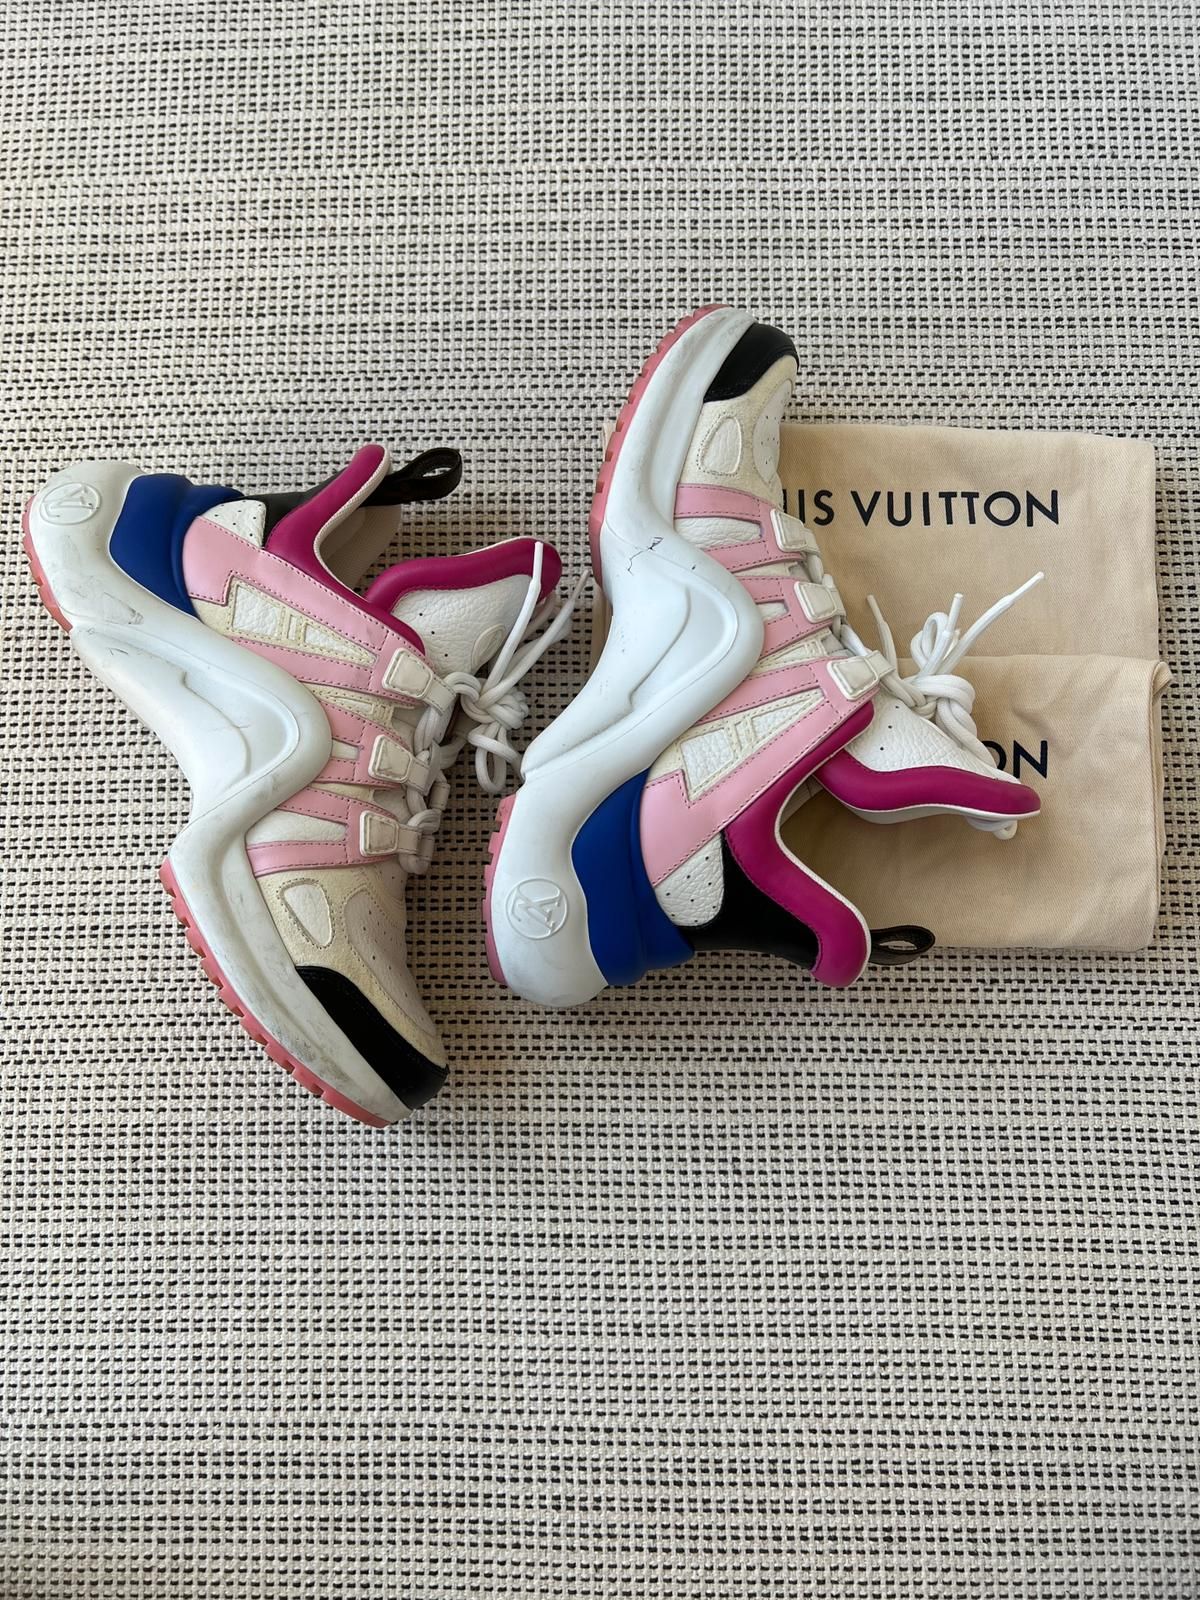 Louis Vuitton Women's LV Archlight Sneakers Fabric and Leather None